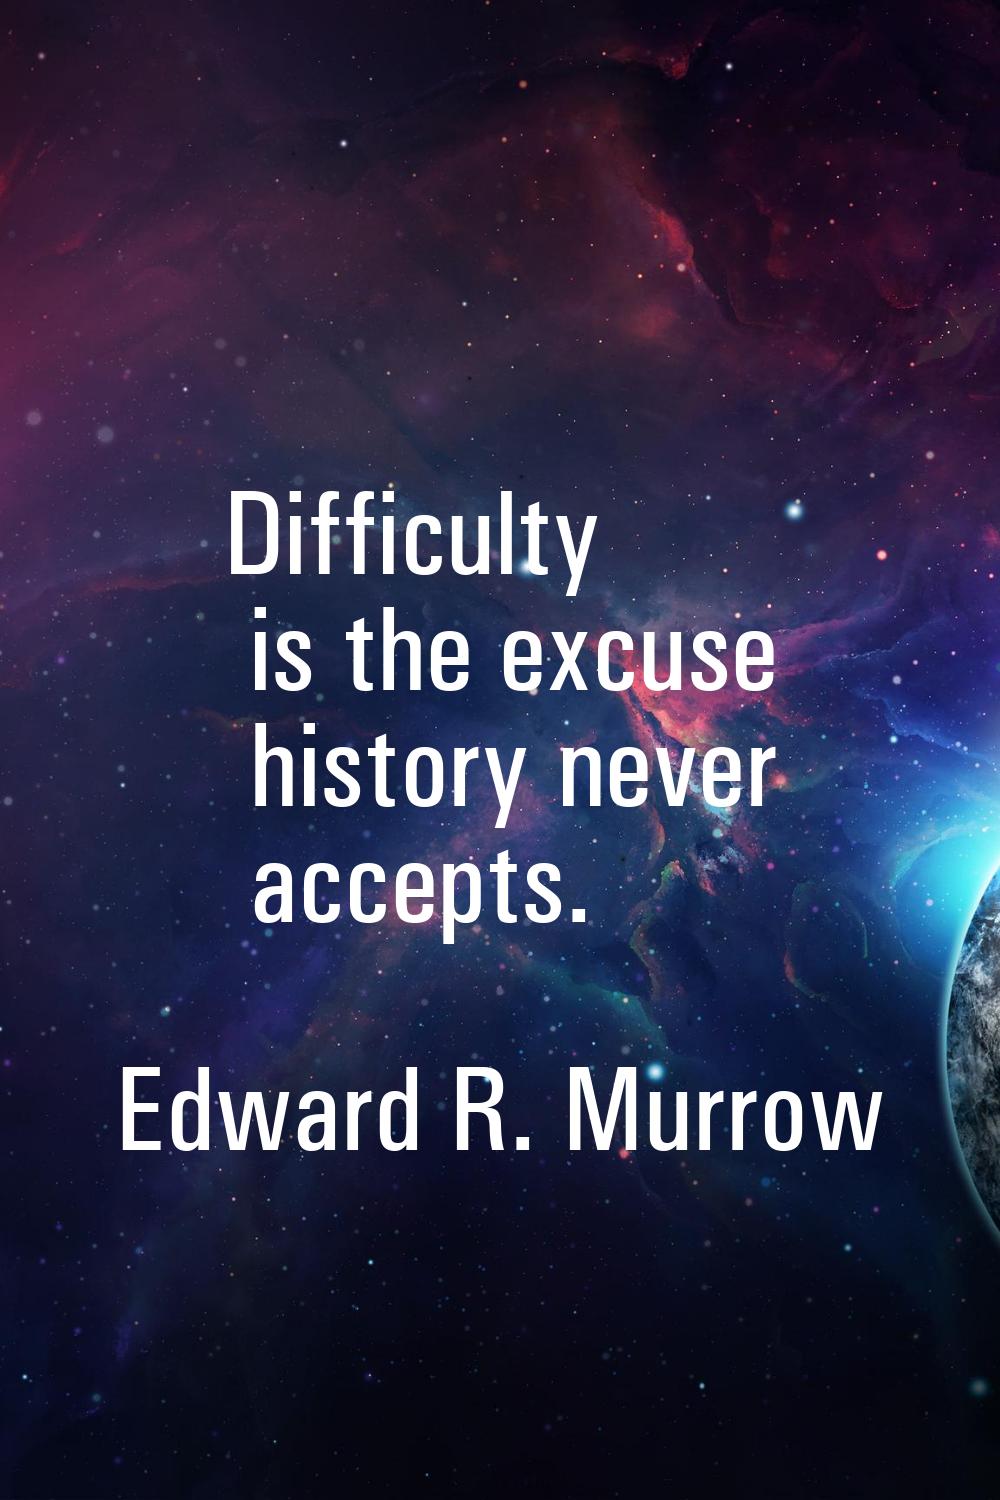 Difficulty is the excuse history never accepts.